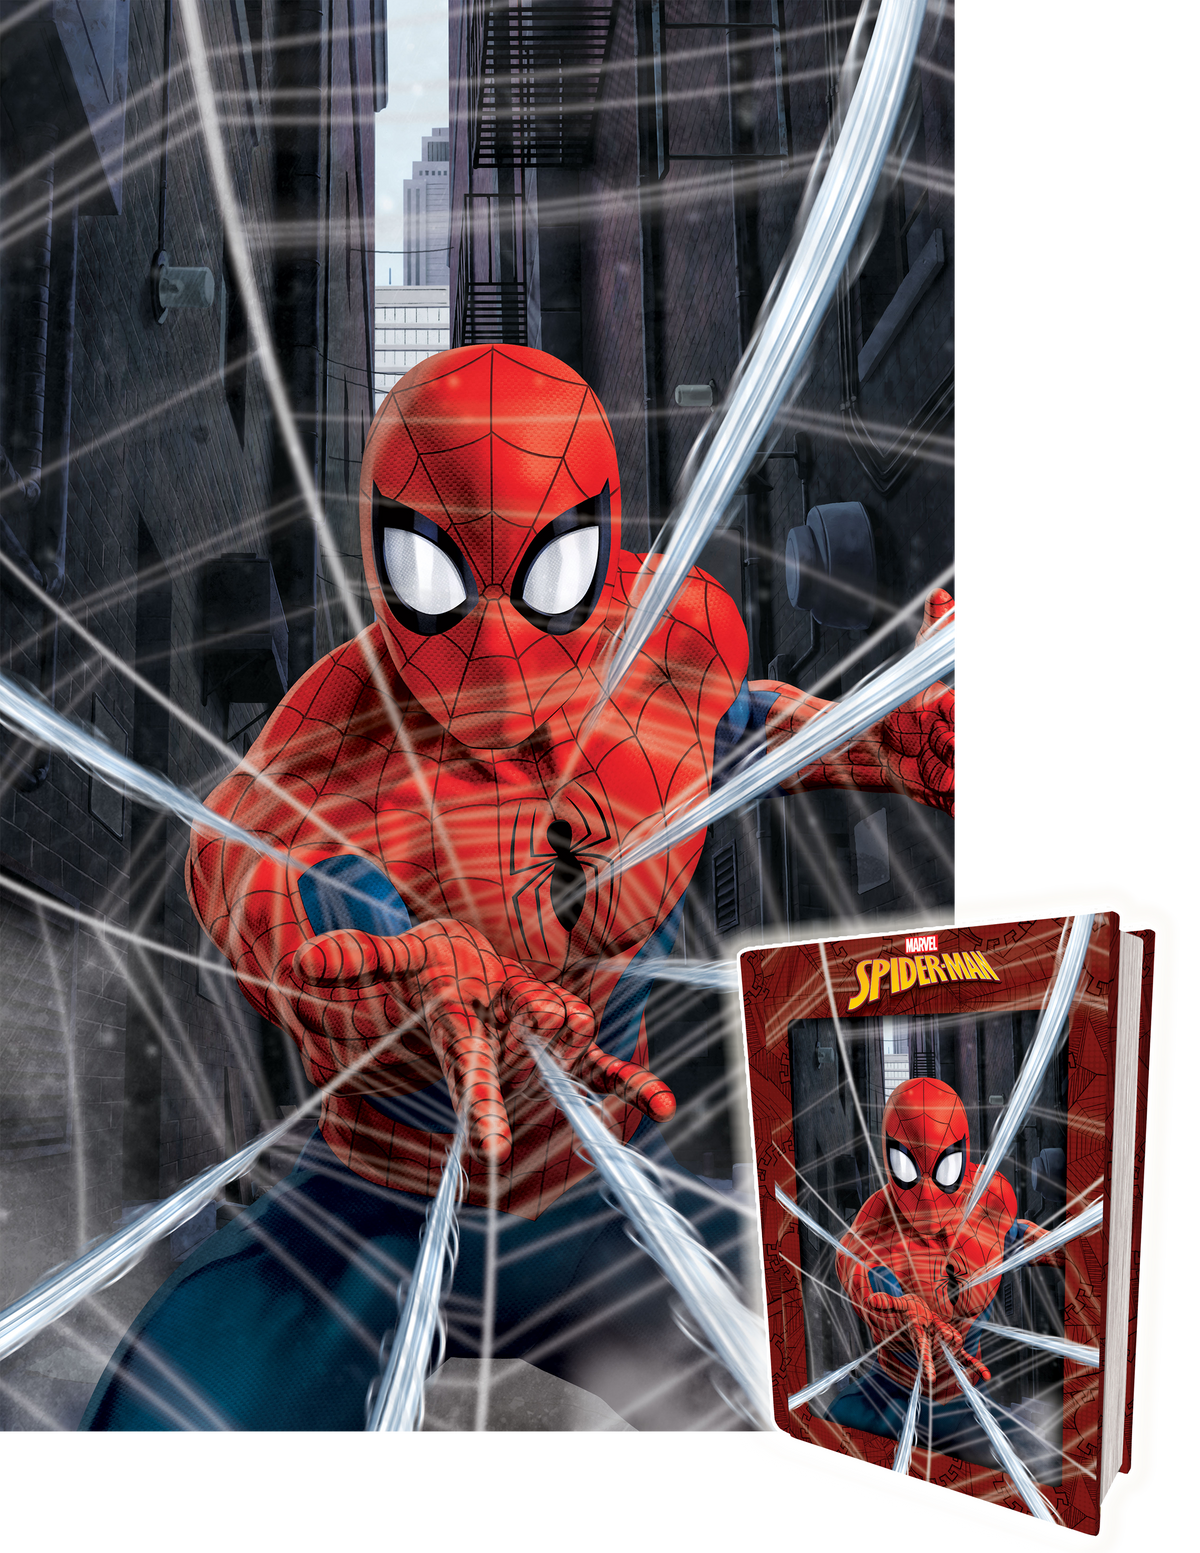 Spider Man Marvel 3D Jigsaw Puzzle in Tin Book Packaging 35561 300pc 18x12"